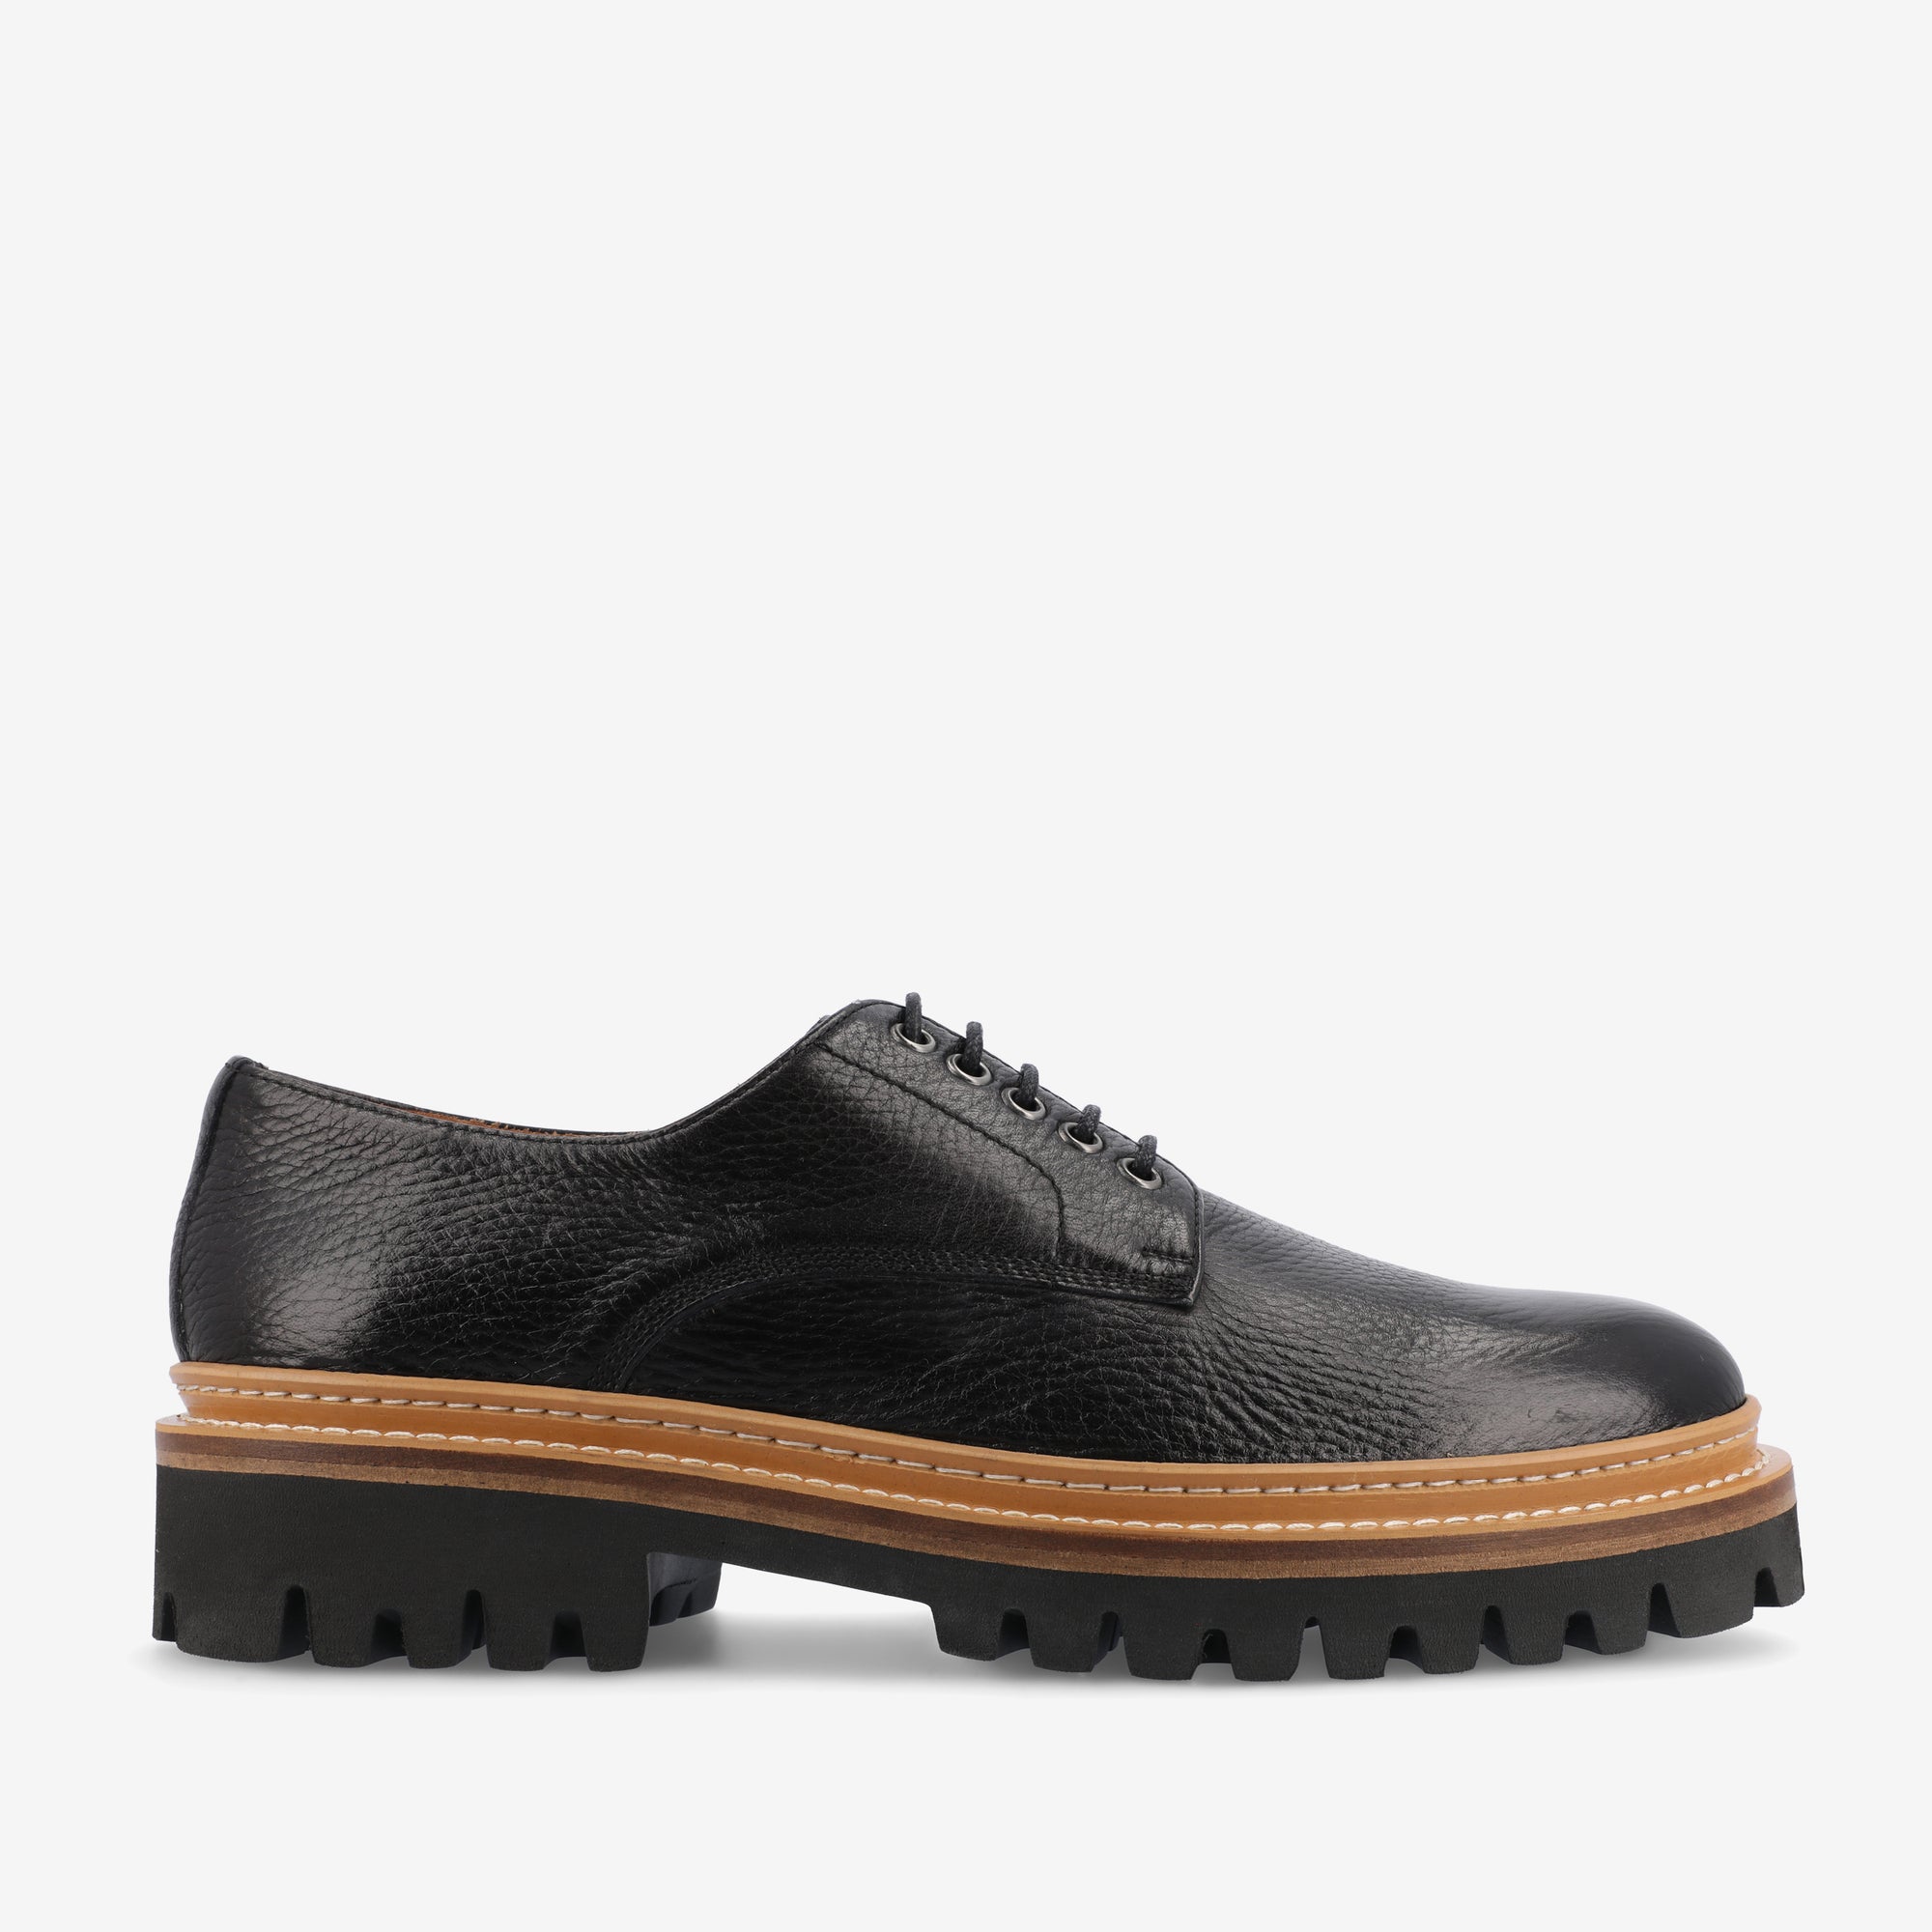 The Country Derby in Black